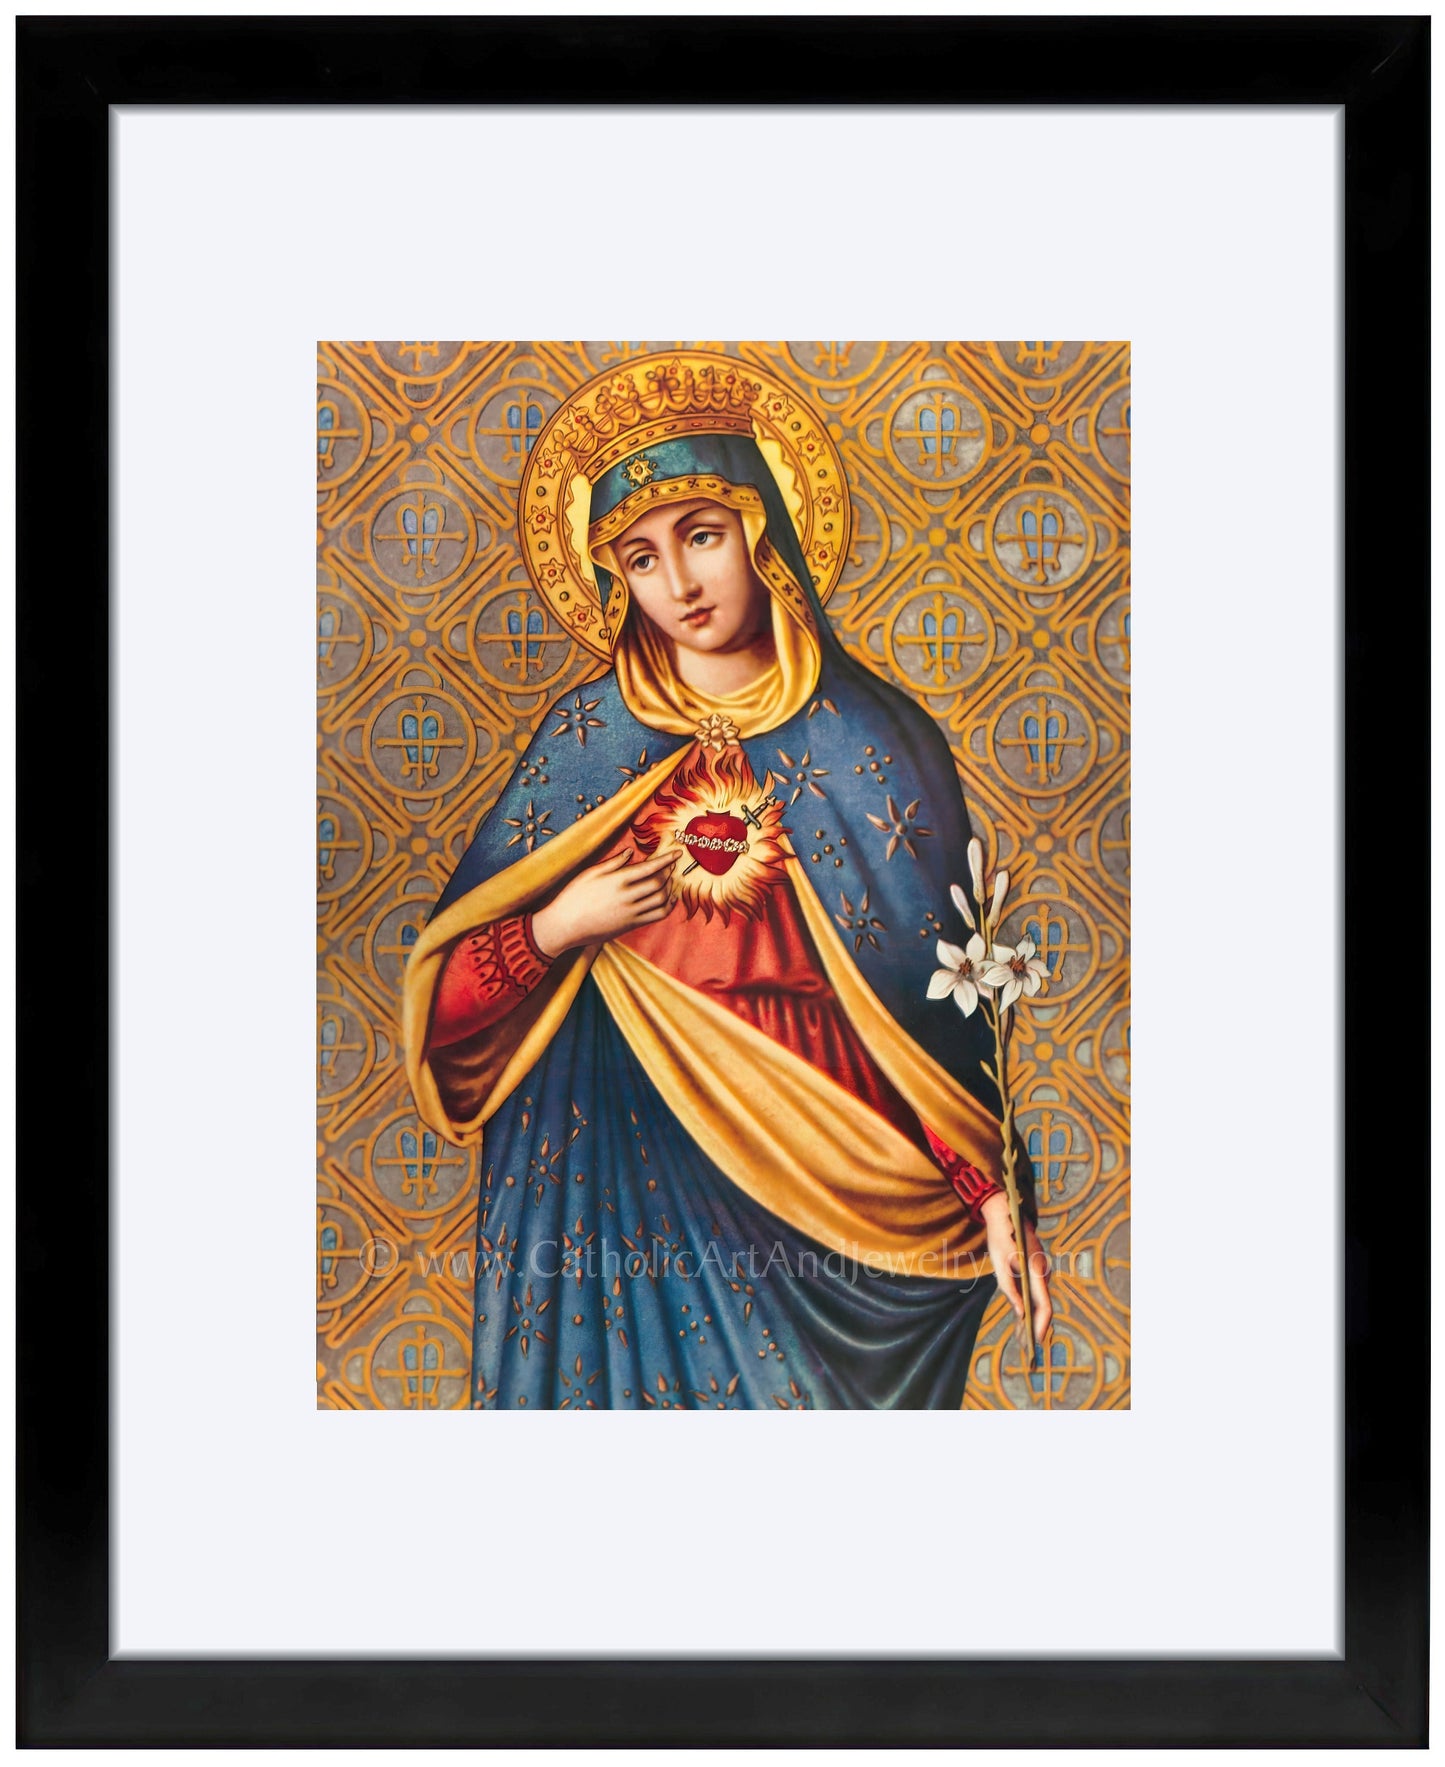 Our Lady of Ollignies (Sorrowful Immaculate Heart)